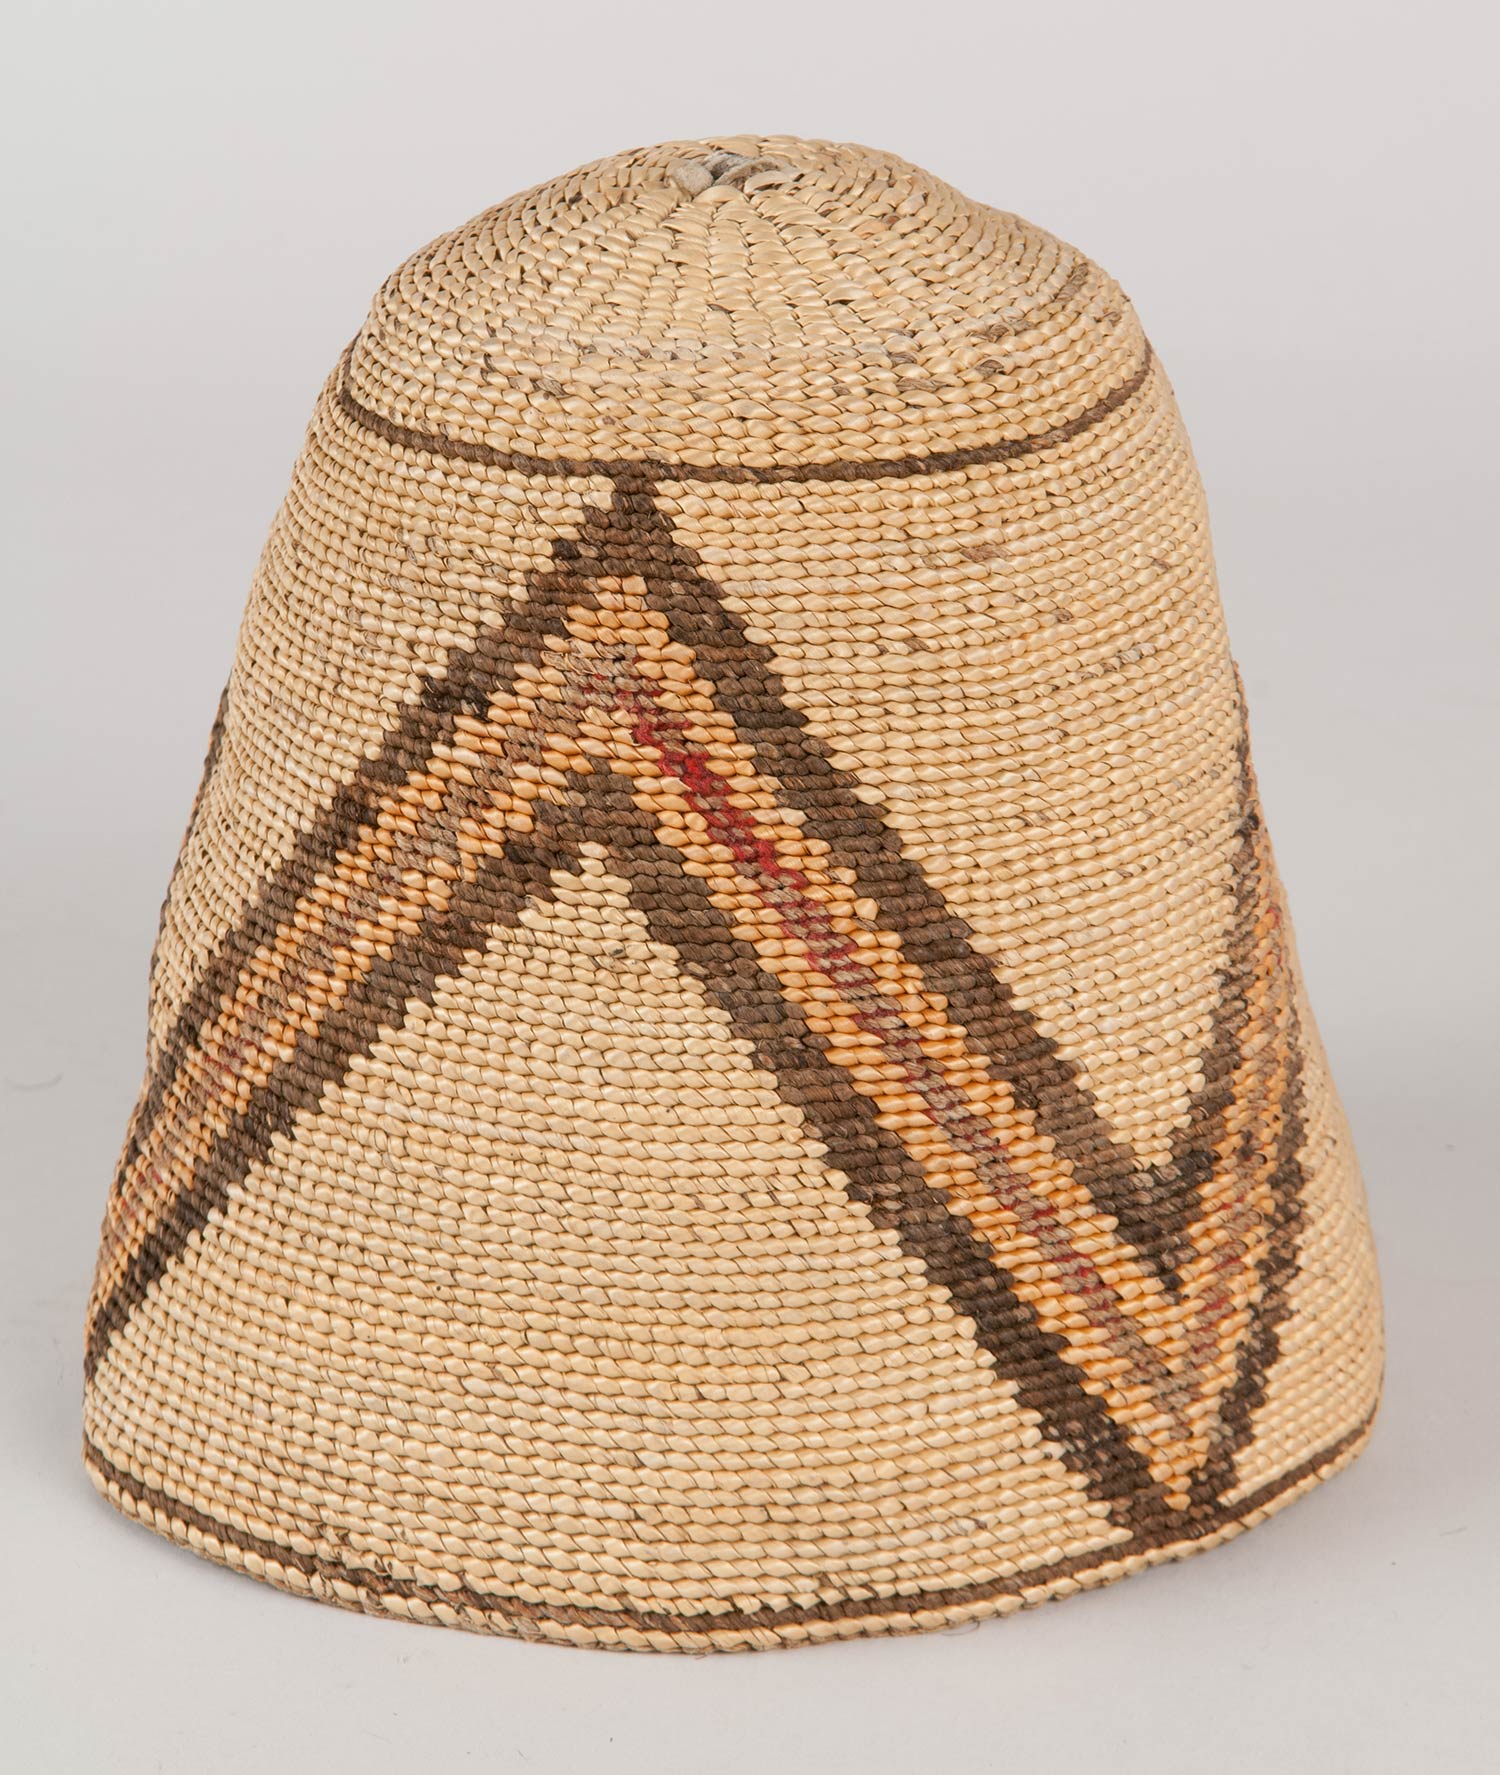 Subconical shaped basket hat made from hemp and beargrass. Designs on the hat feature a three part separated pyramid with horizontal banding on the interior in orange and dark brown.